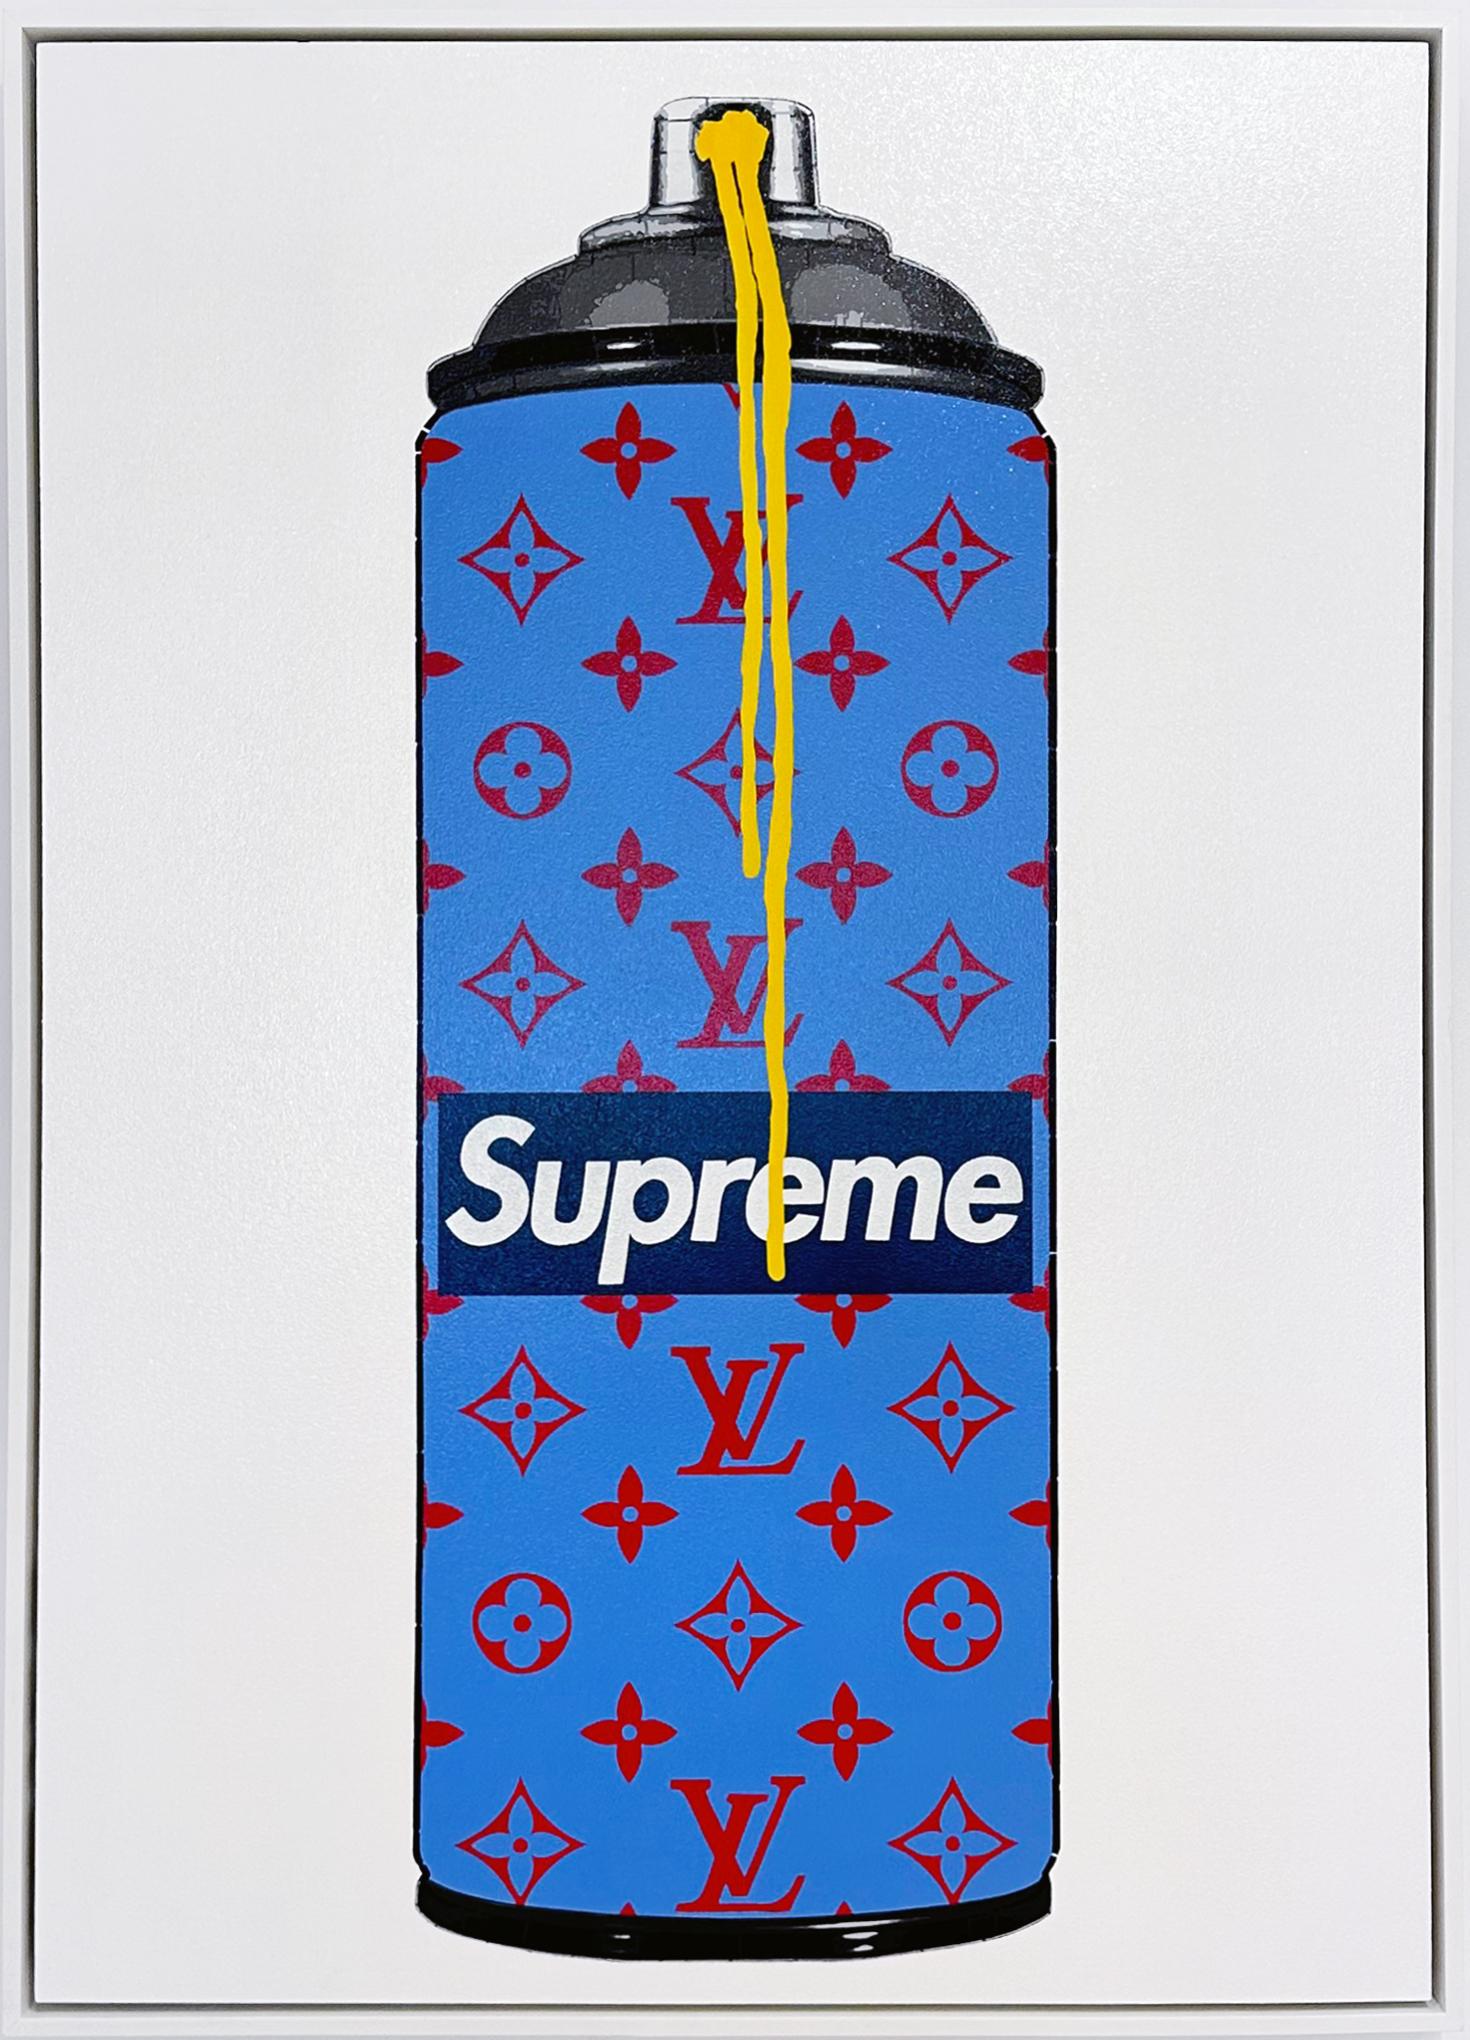 LV Supreme Blutack - Painting by Campbell la Pun